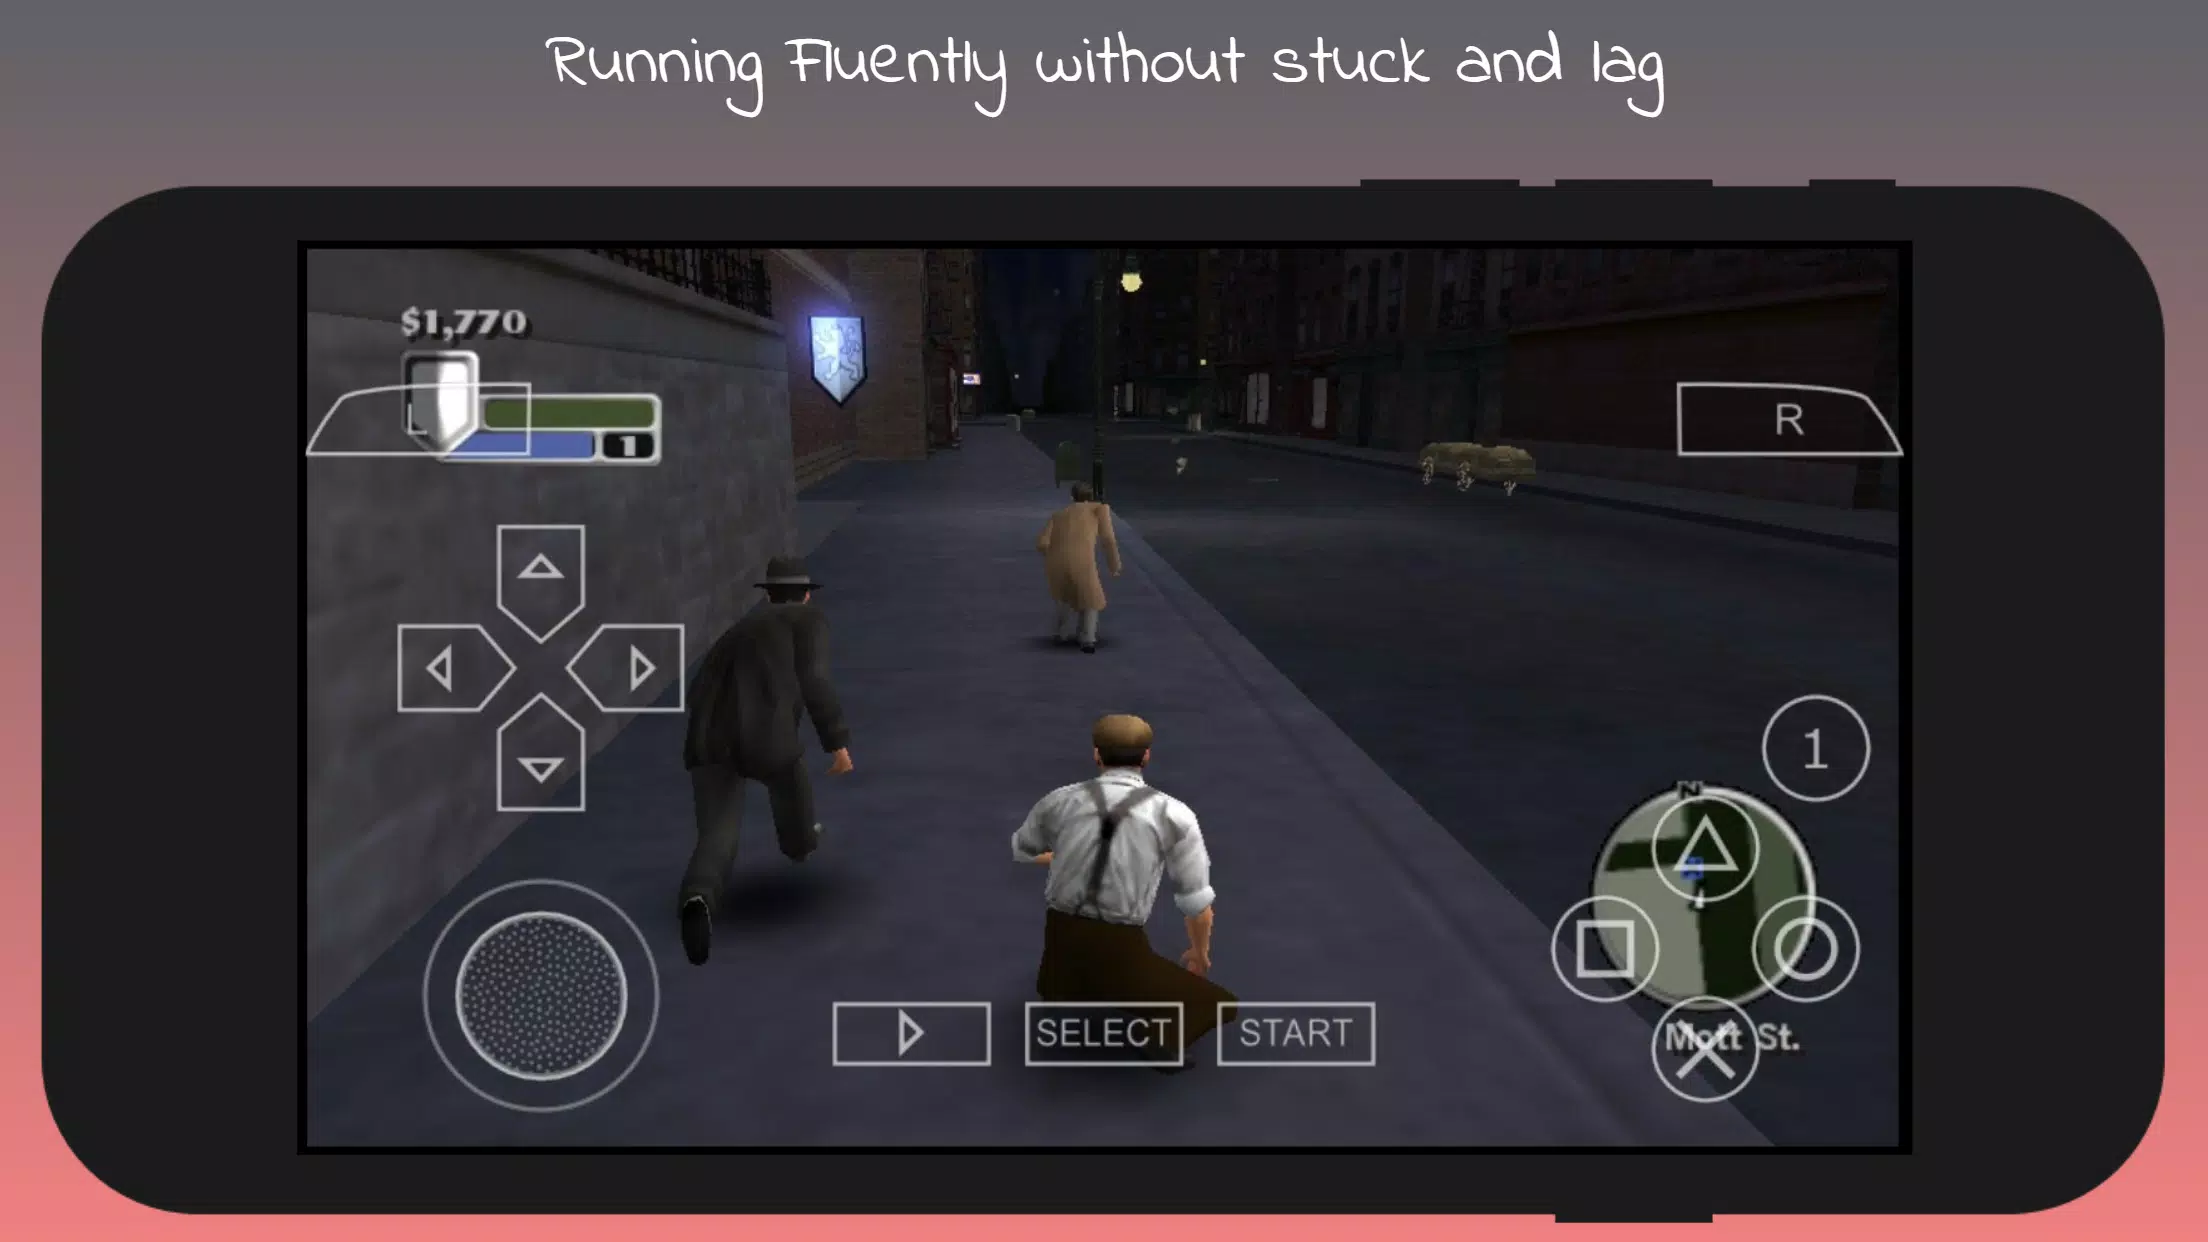 PSP DOWNLOAD - Most Complete Iso Game Top List APK for Android Download